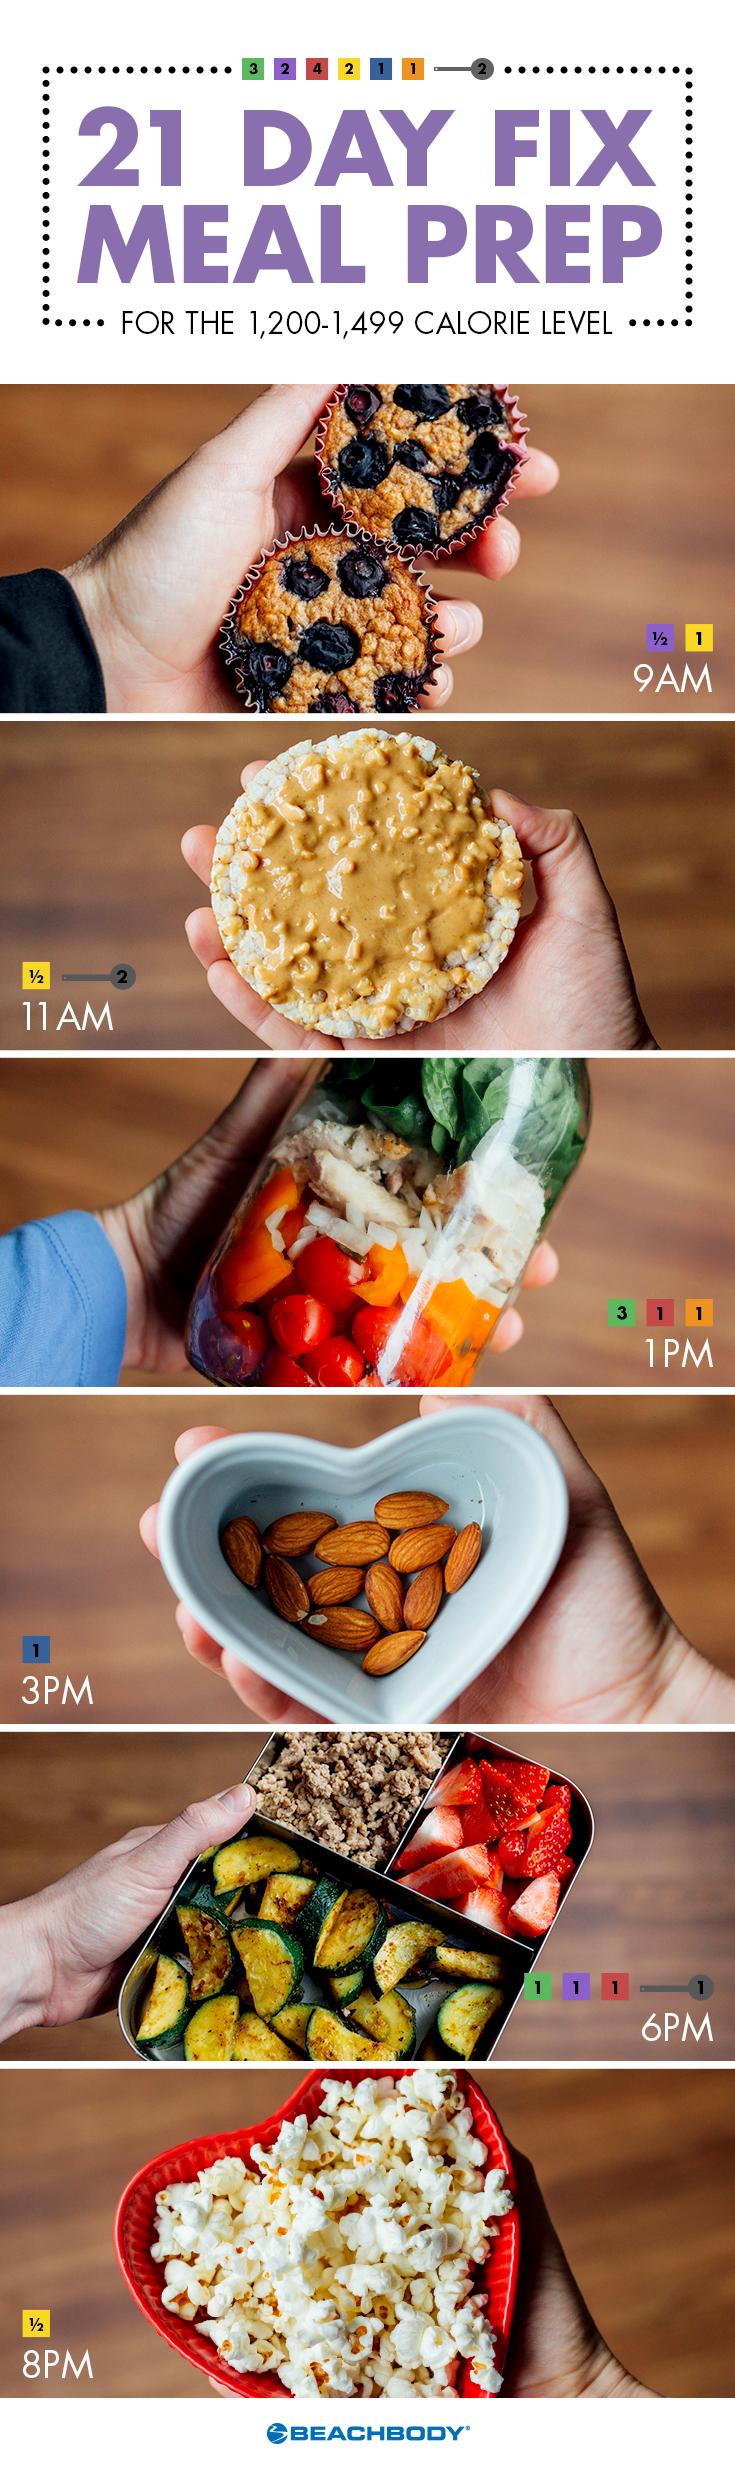 you are fort Hospitality Quick and Simple Meal Prep | 21 Day Fix | The Beachbody Blog